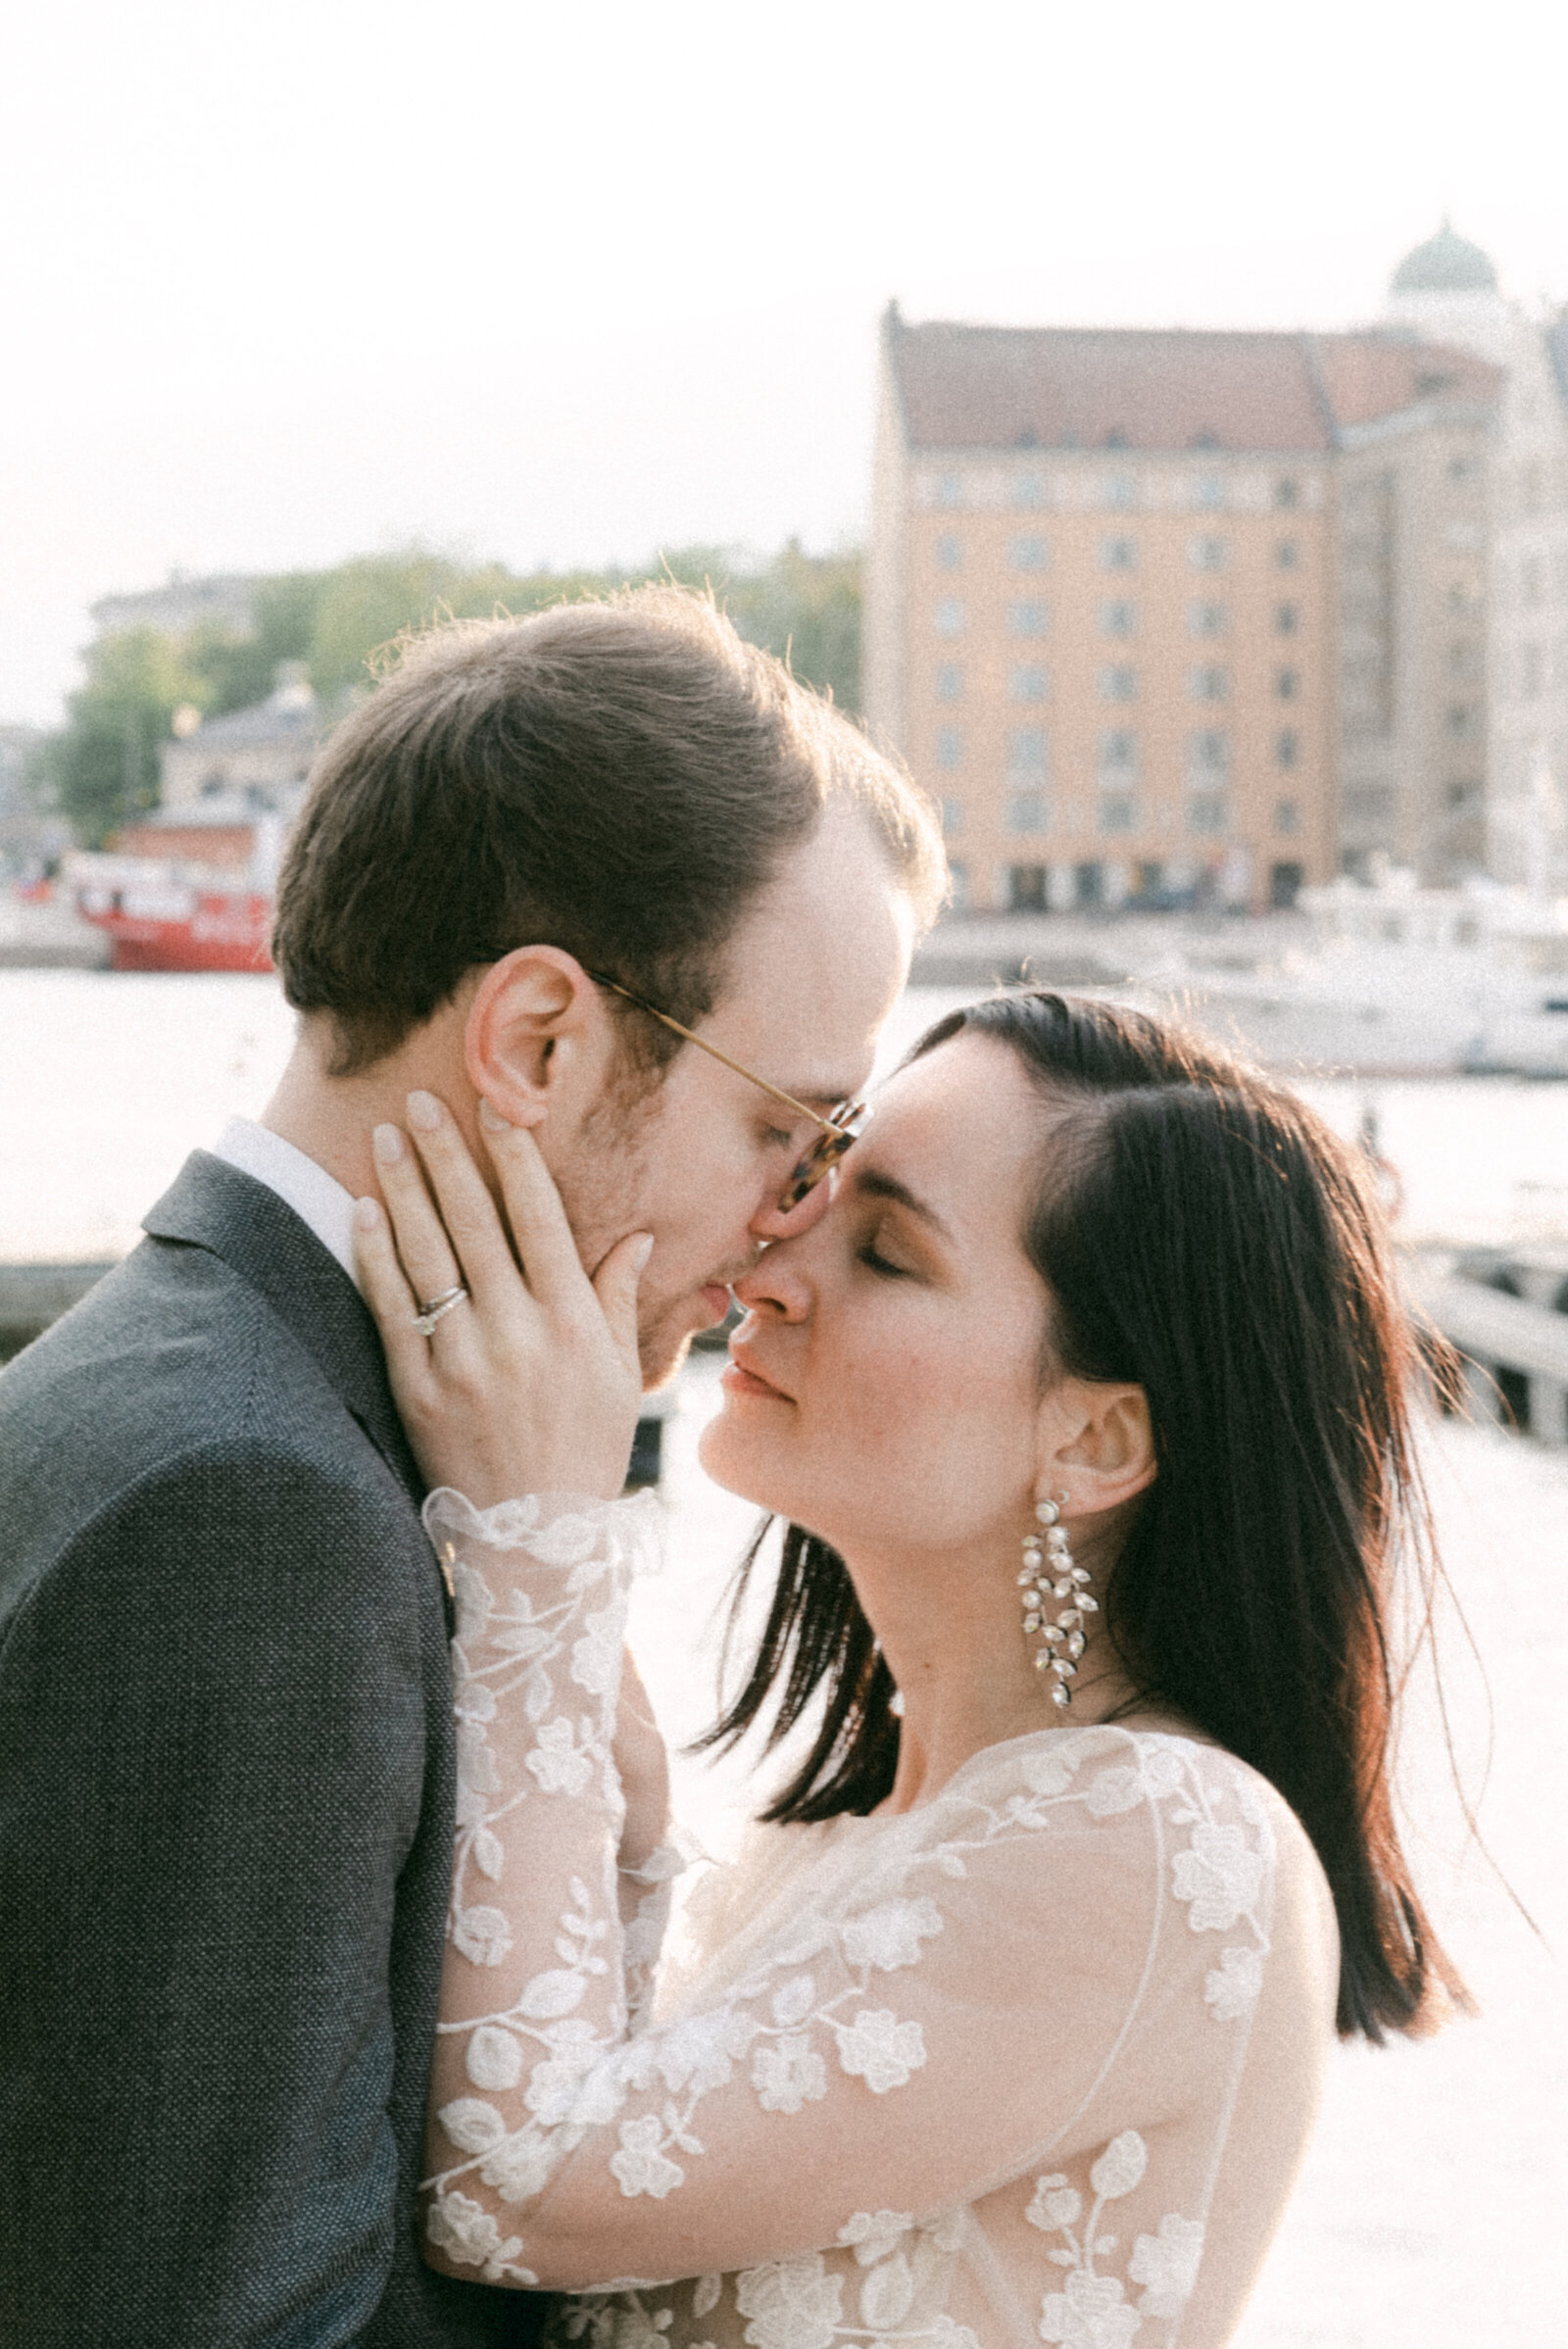 A wedding couple about to kiss in a seaside elopement photograph by Finnish wedding photographer Hannika Gabrielssonwedding photographer Hannika Gabrielsson.